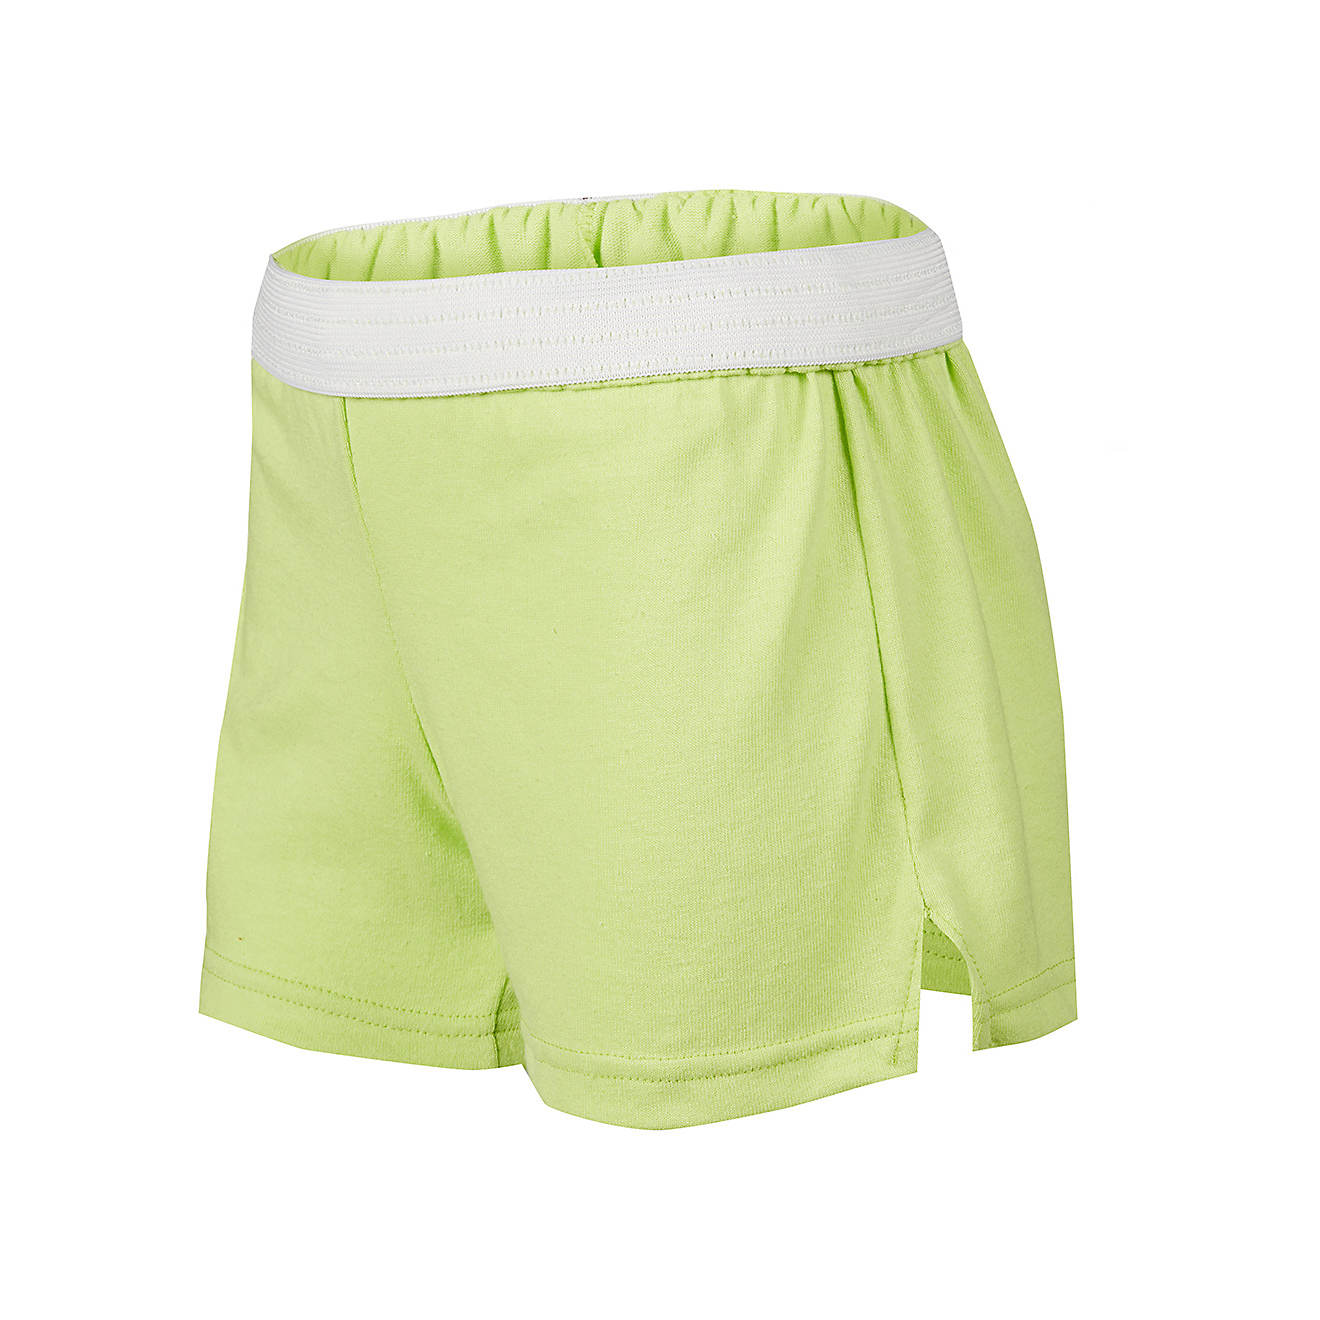 Original Soffe Cheer Shorts Youth Small Forest Green 